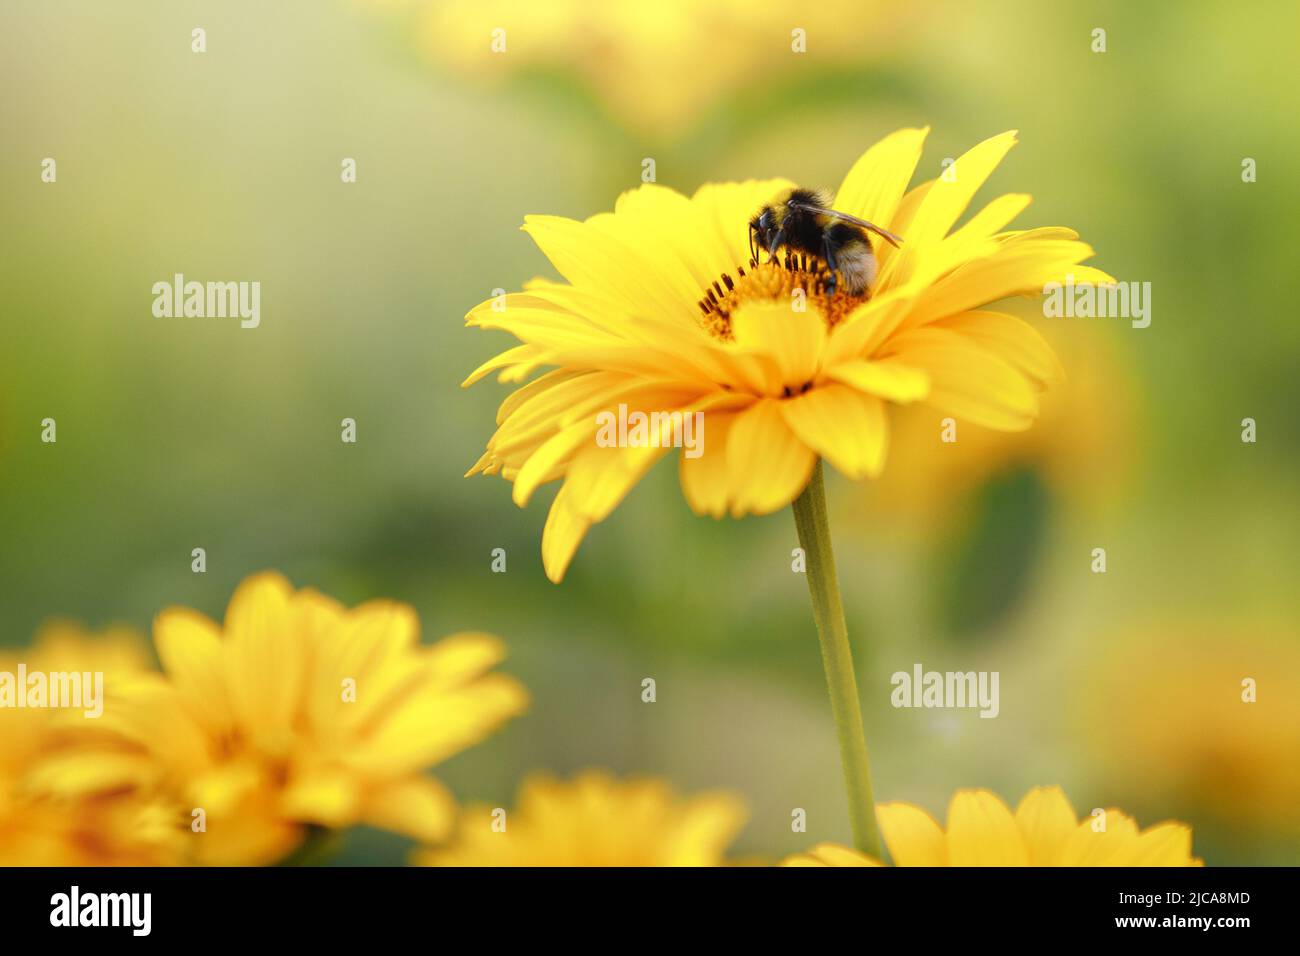 Blurred background of many yellow Echinacea flowers with a bee on the petals. Gift card, with copy space. Stock Photo